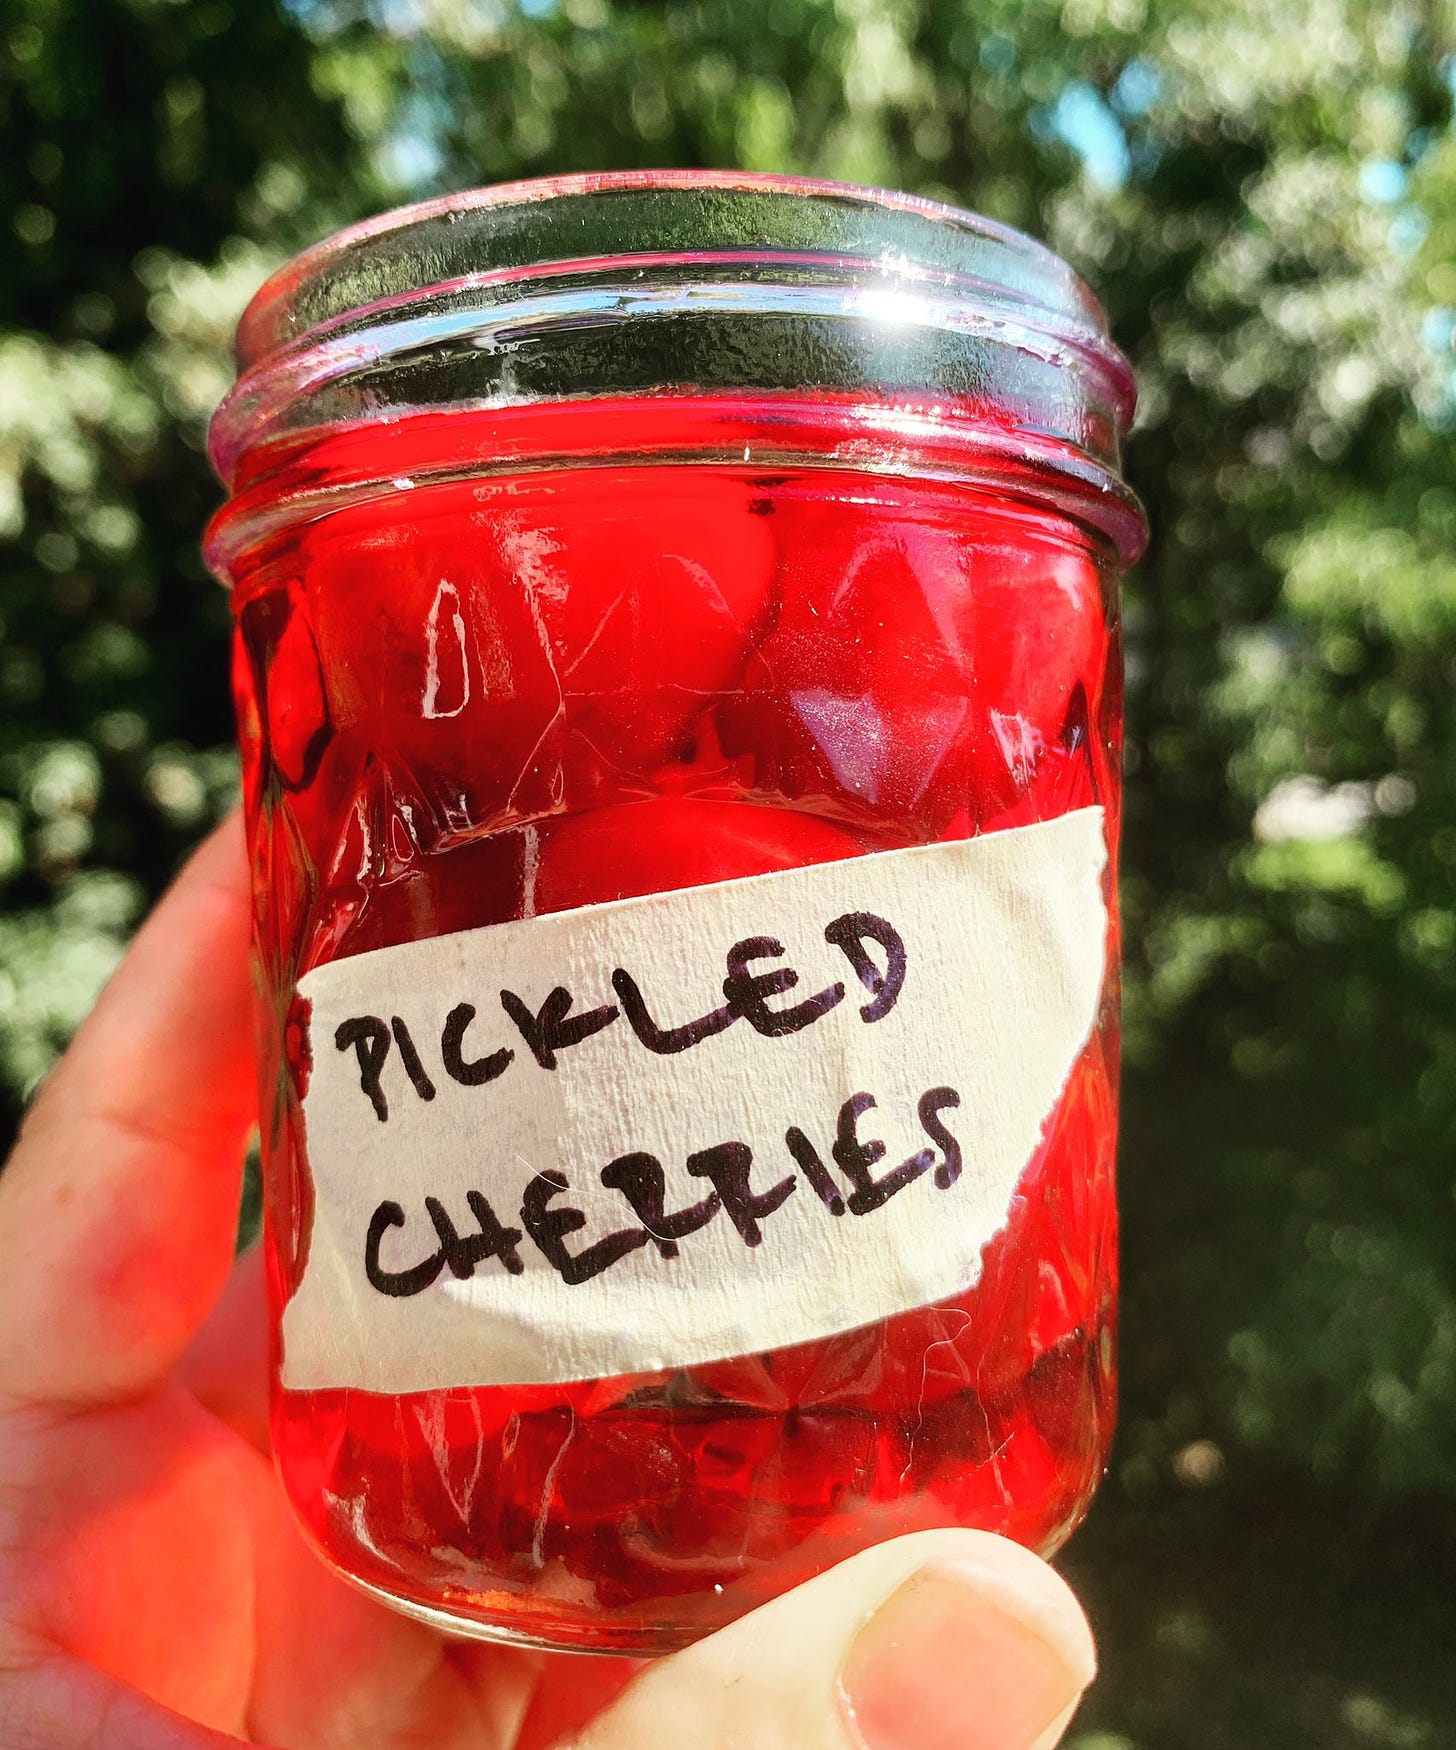 a small mason jar labeled pickled cherries full of bright red cherries